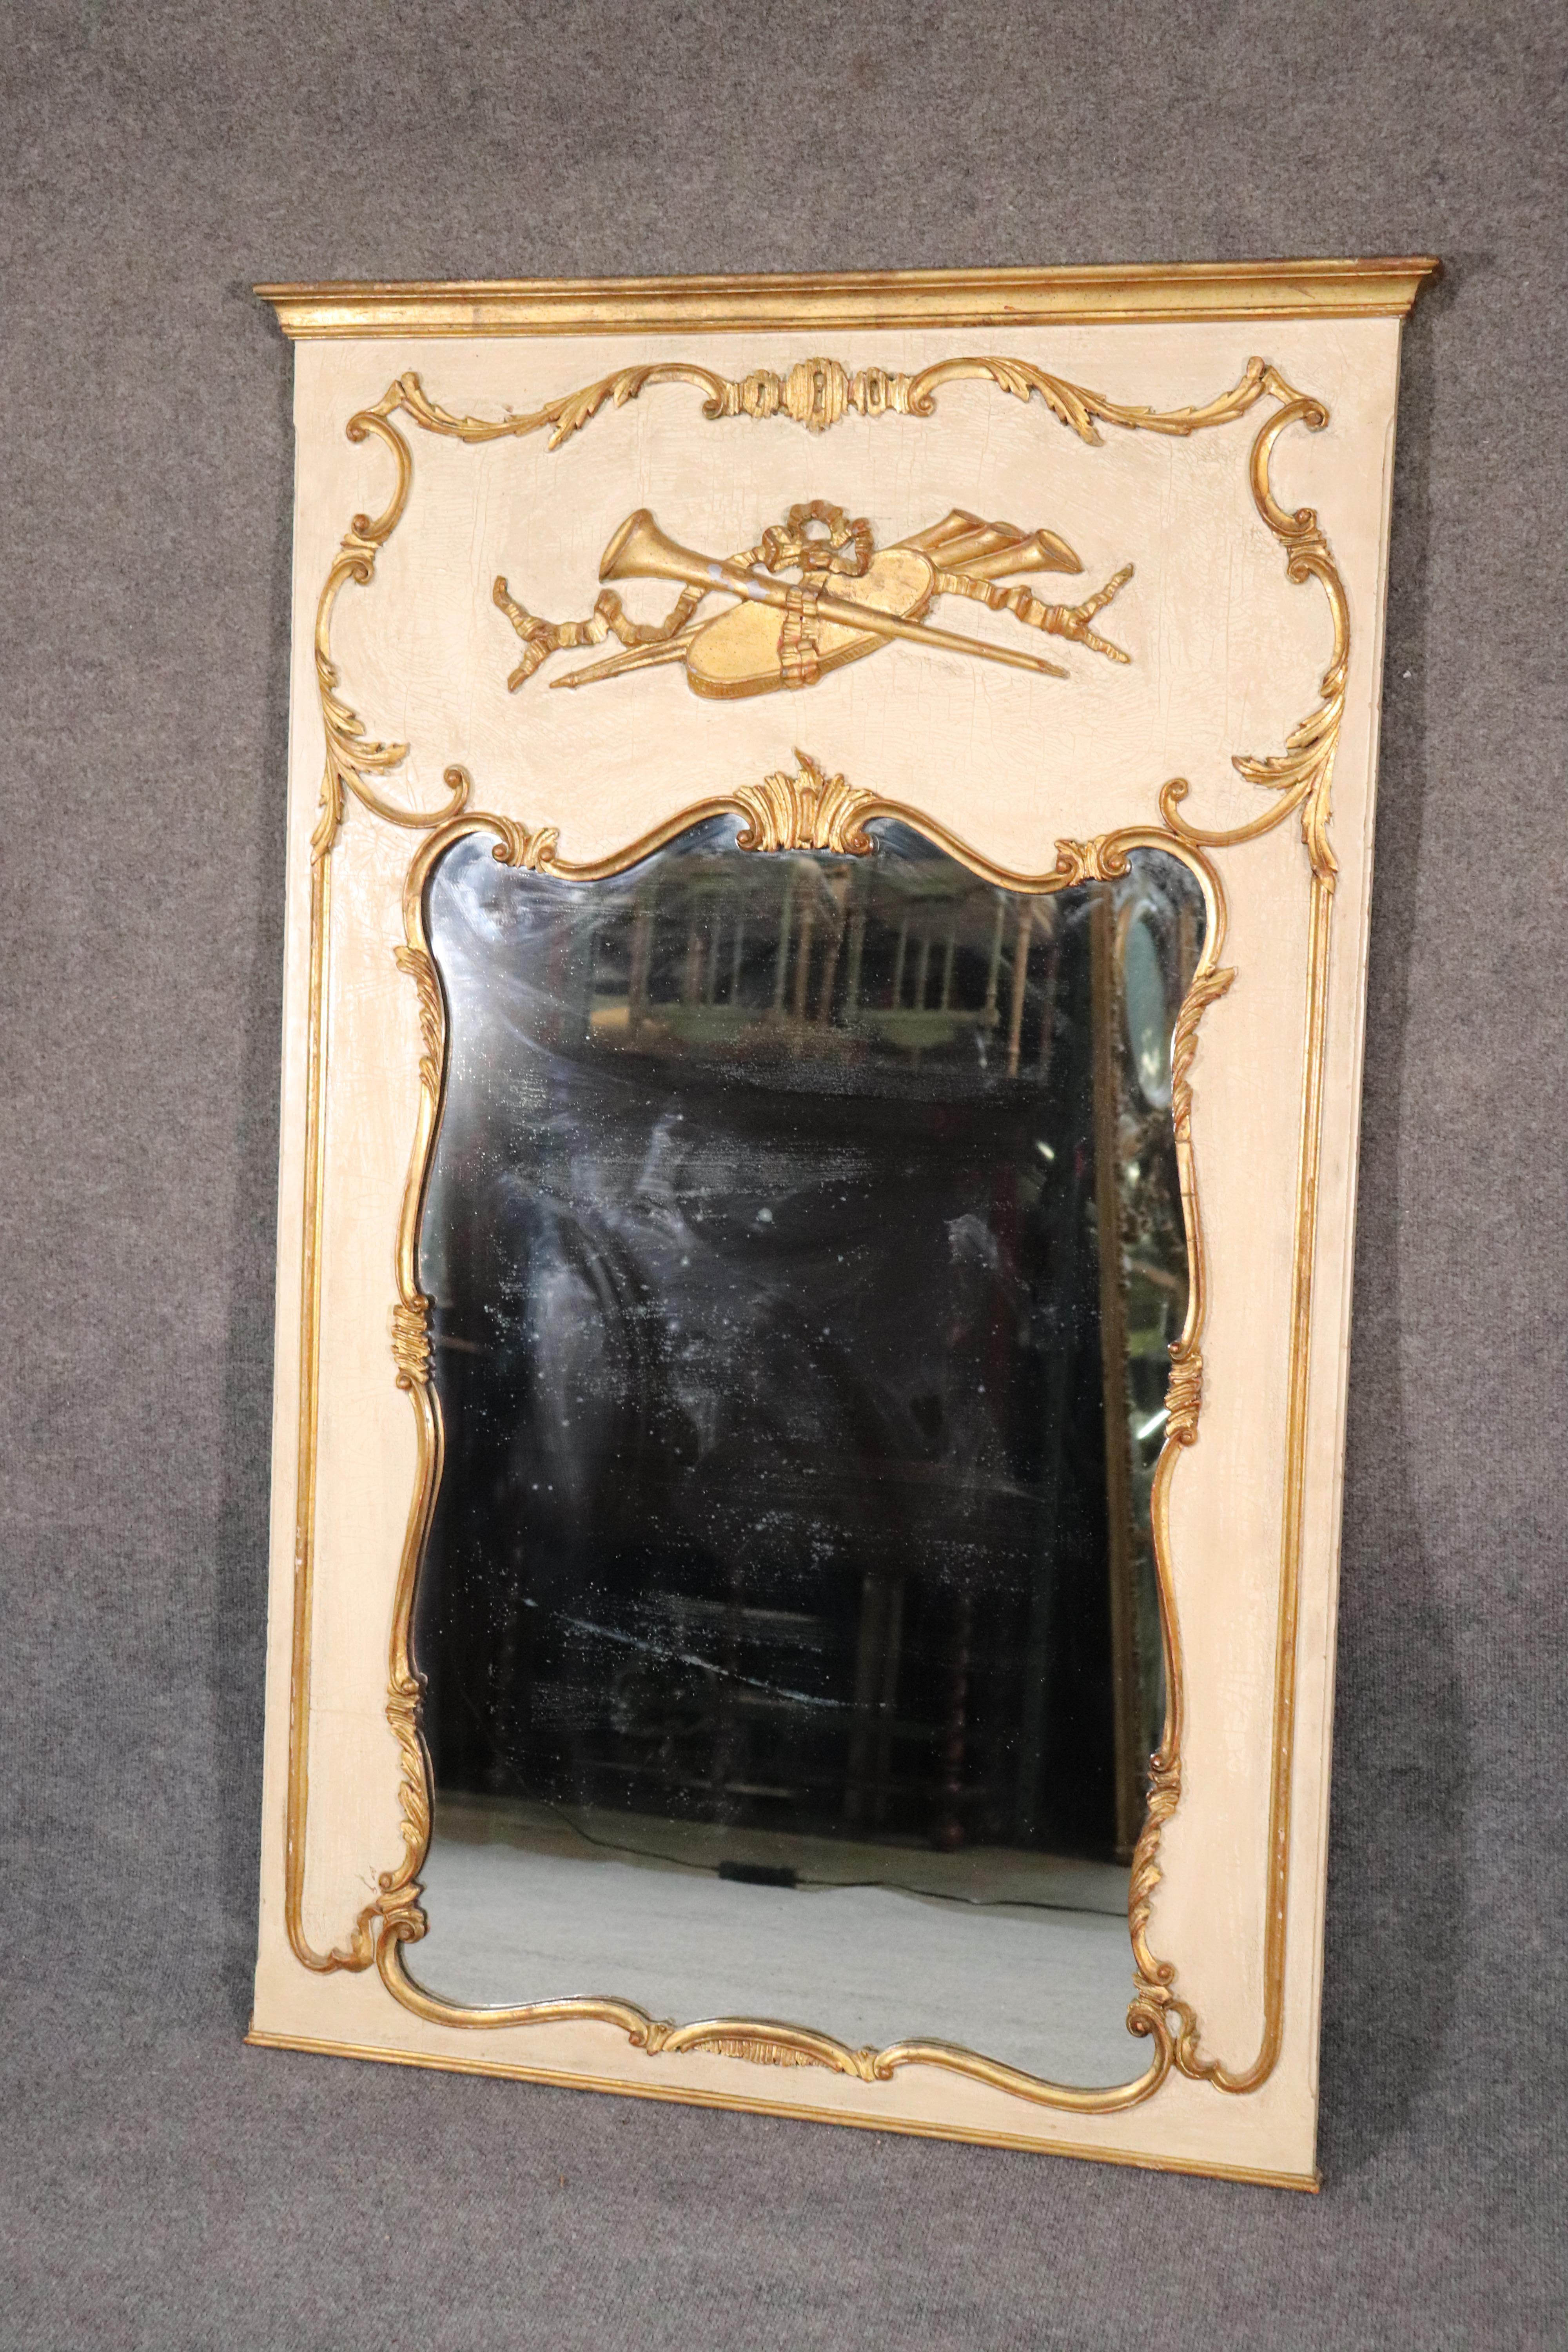 This is a gorgeous Italian made French Louis XV crème painted and gold leaf mirror. The mirror is in good original condition. The mirror measures 59 tall x 38 wide x 2 inches deep.